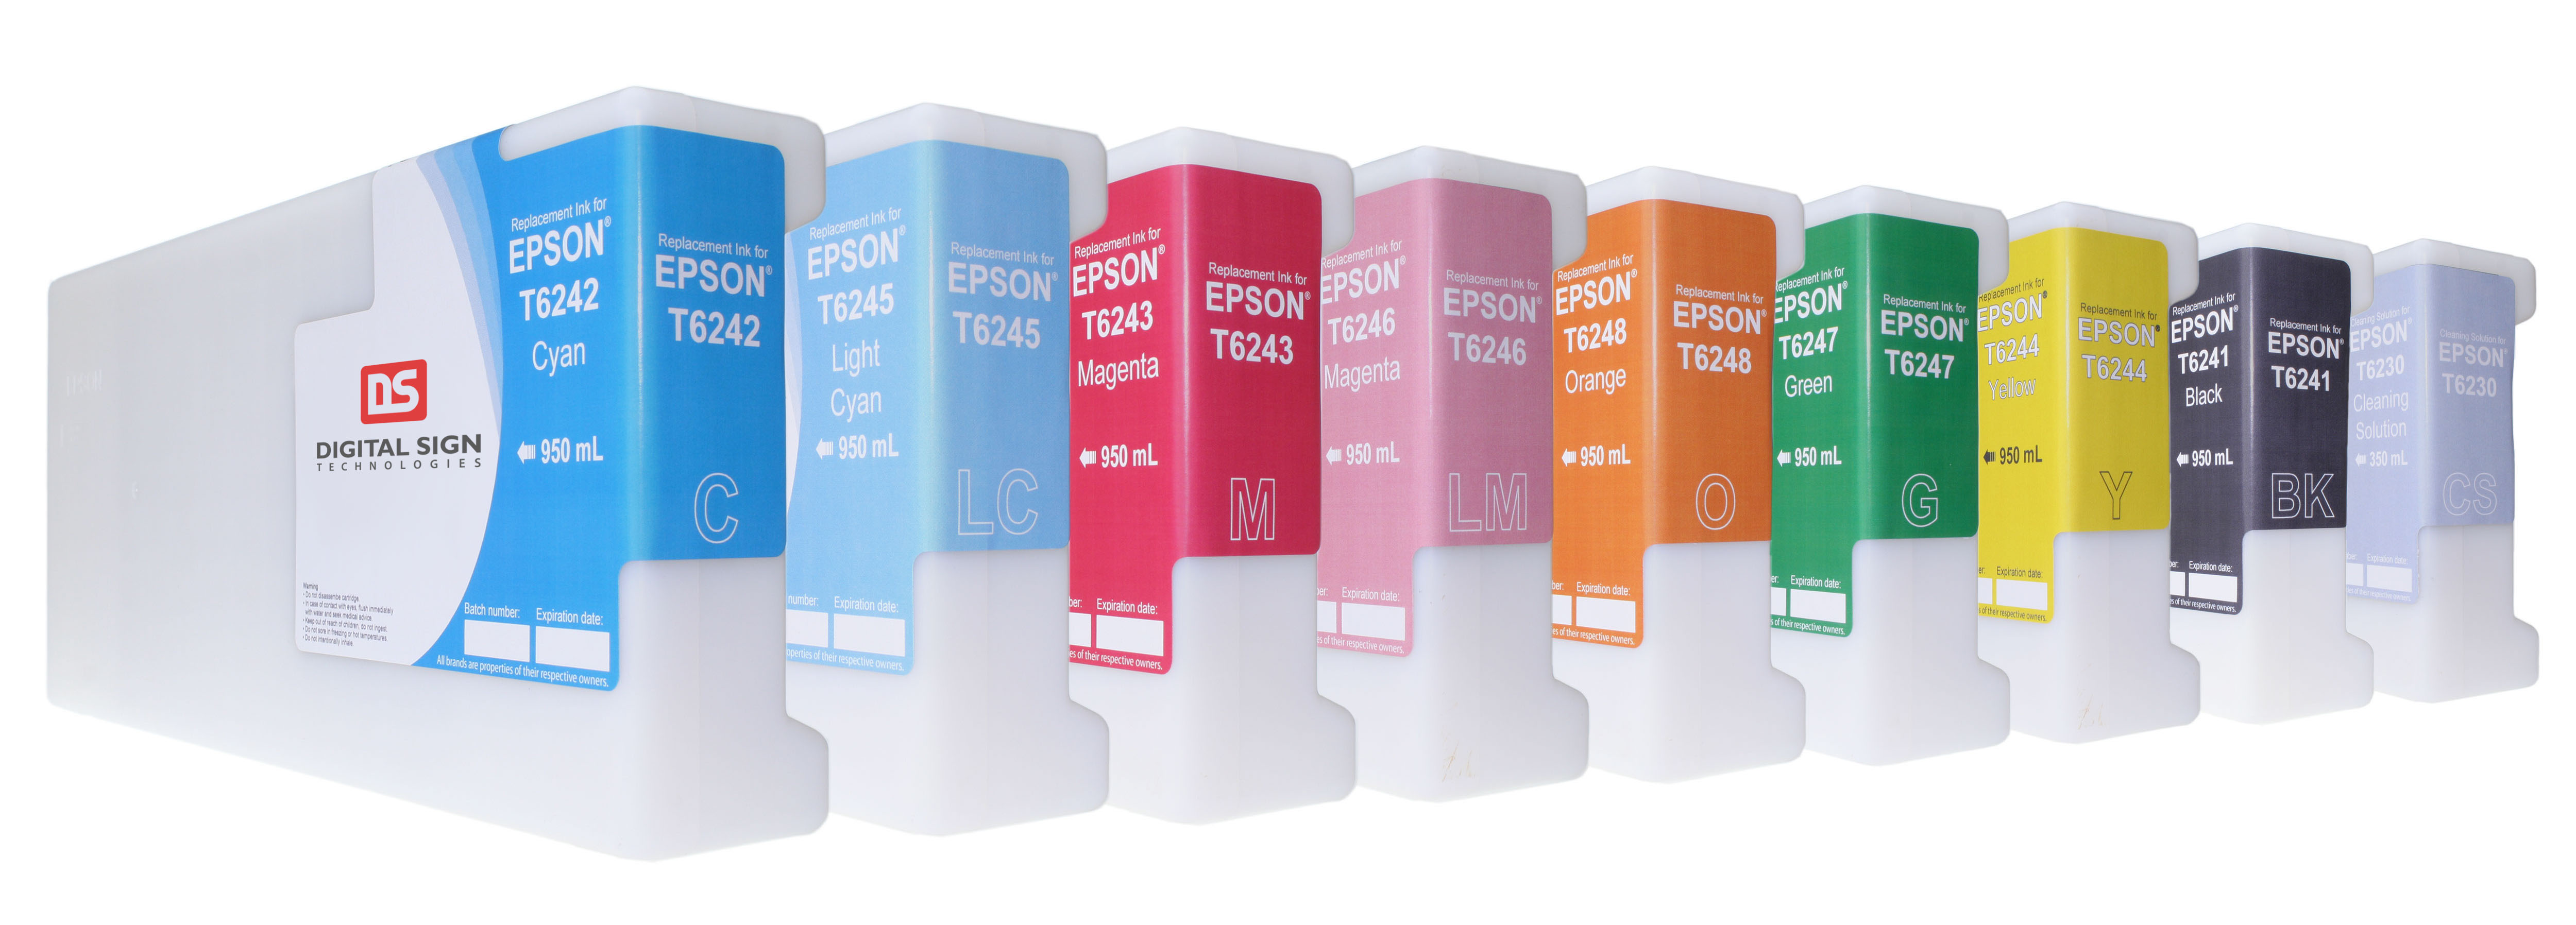 Epson UltraChrome GS ink Cartridges by DST